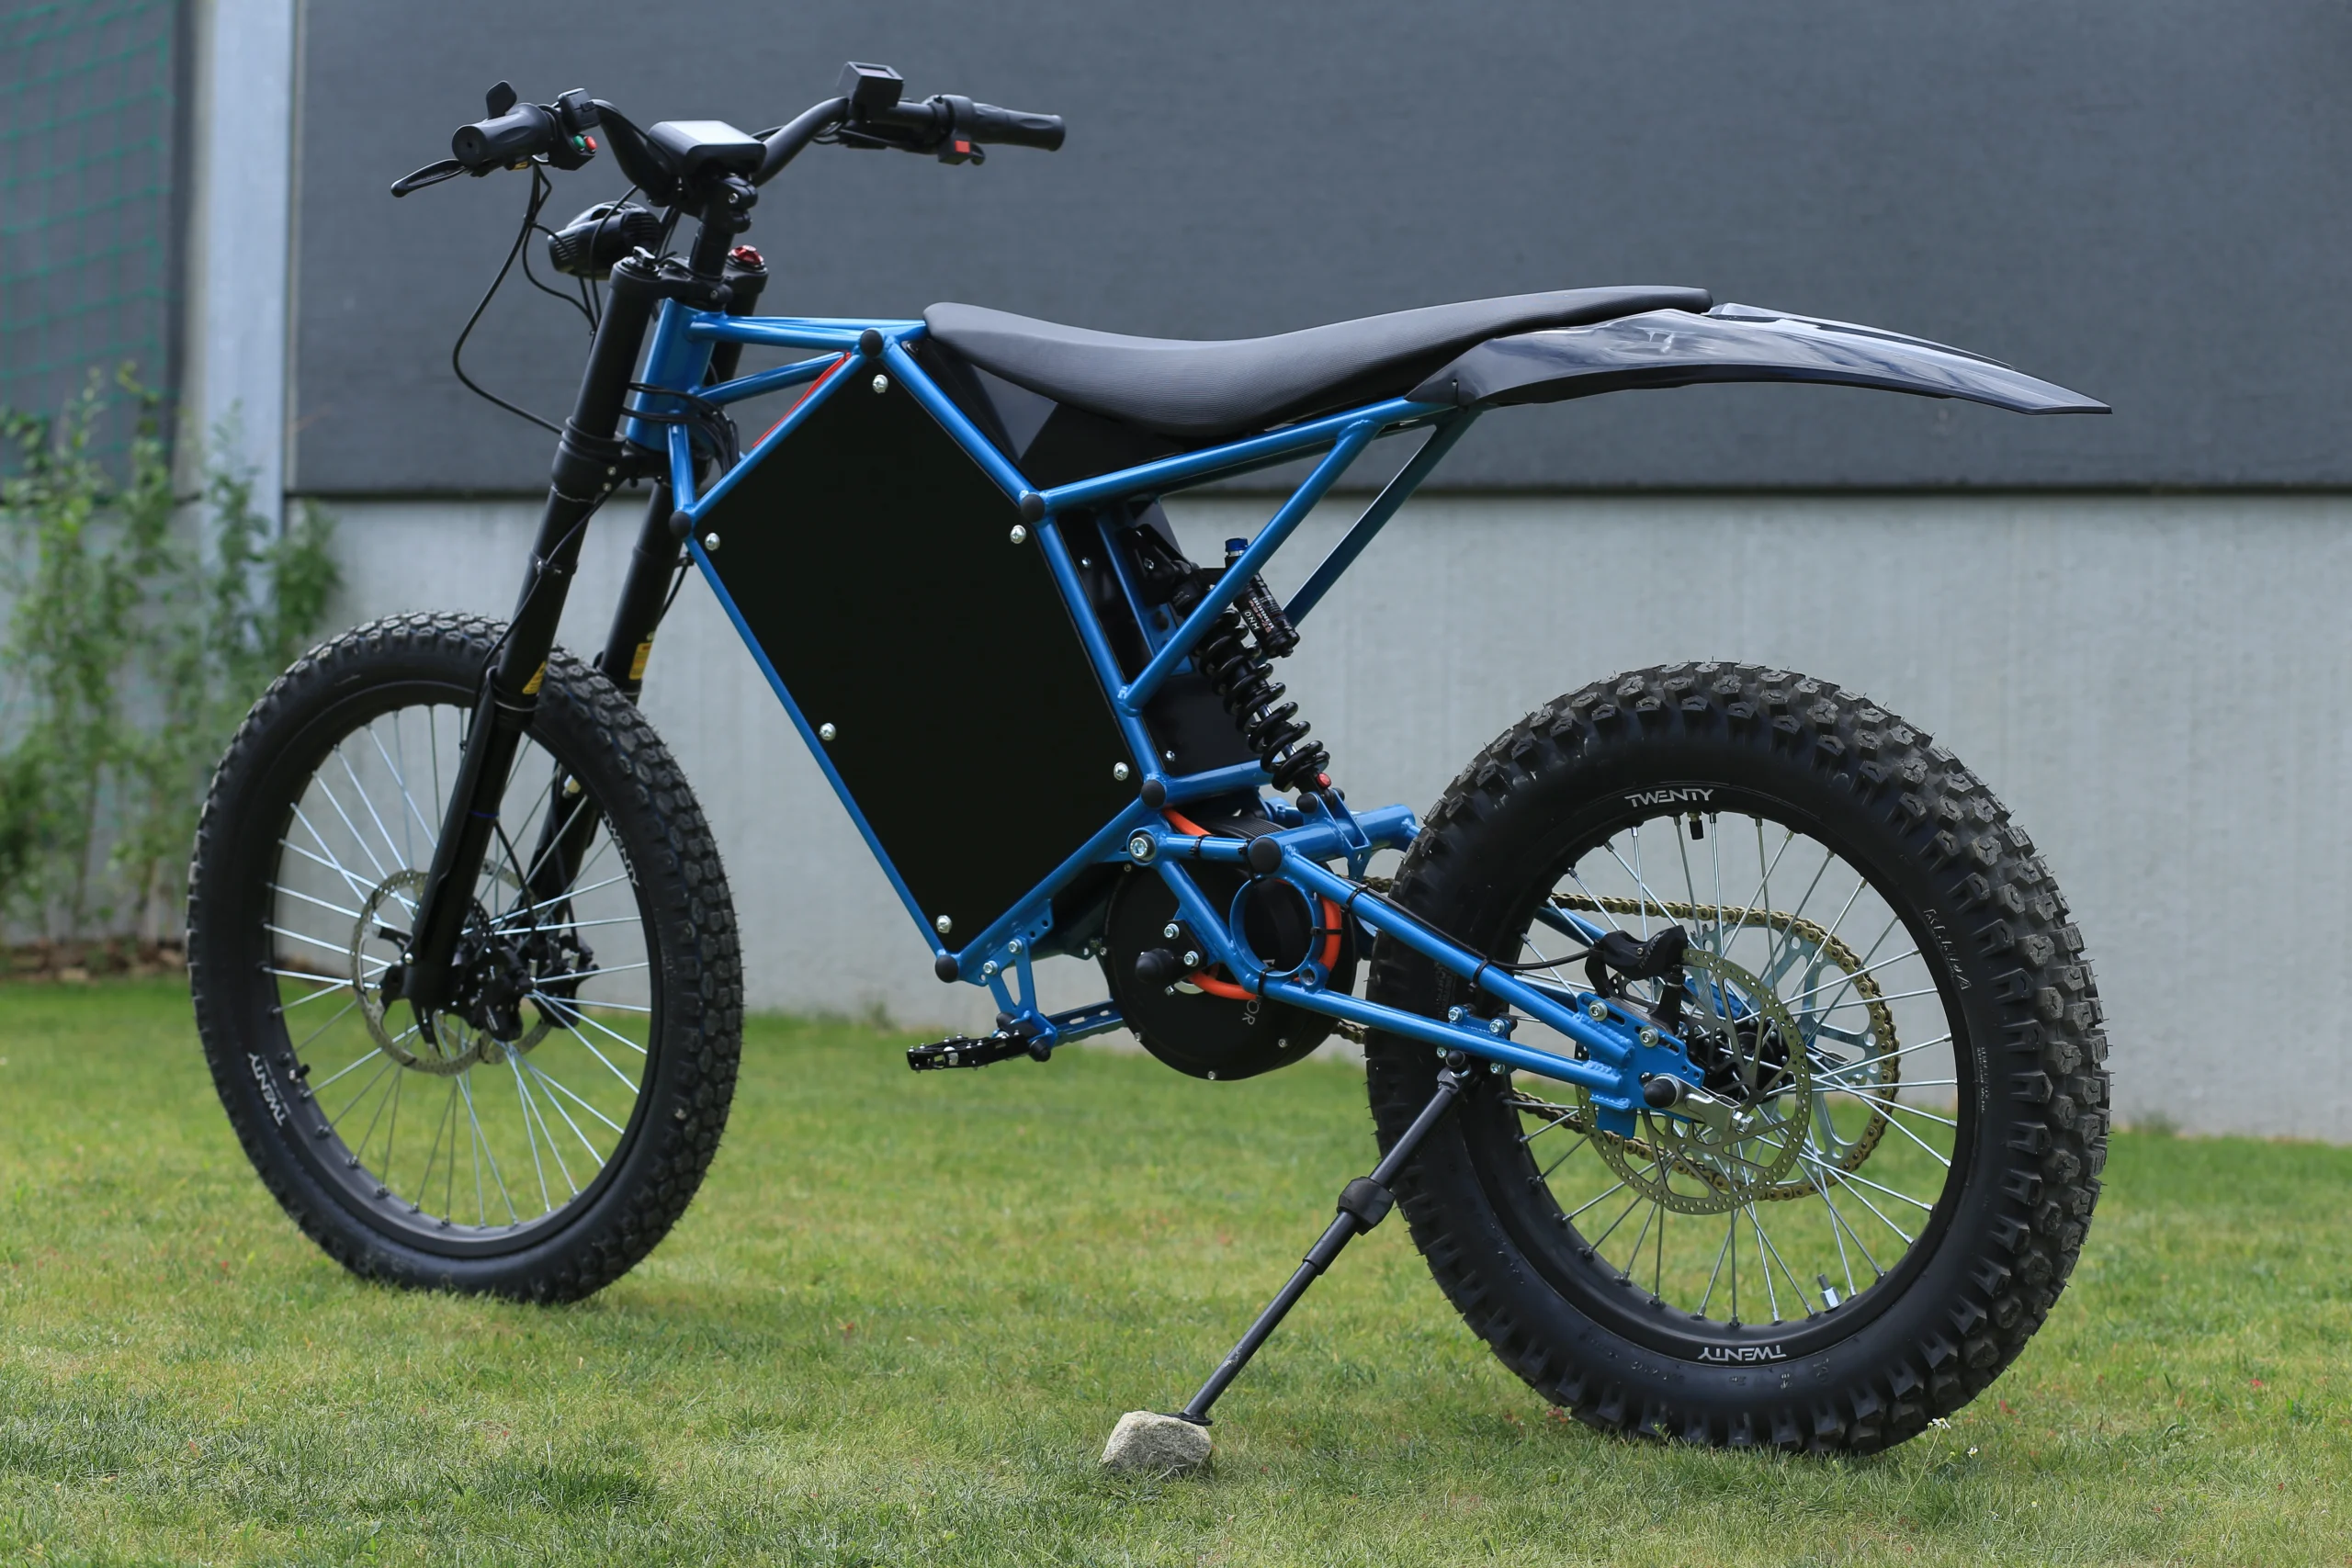 Why Are Electric Dirt Bikes Not Street Legal? 